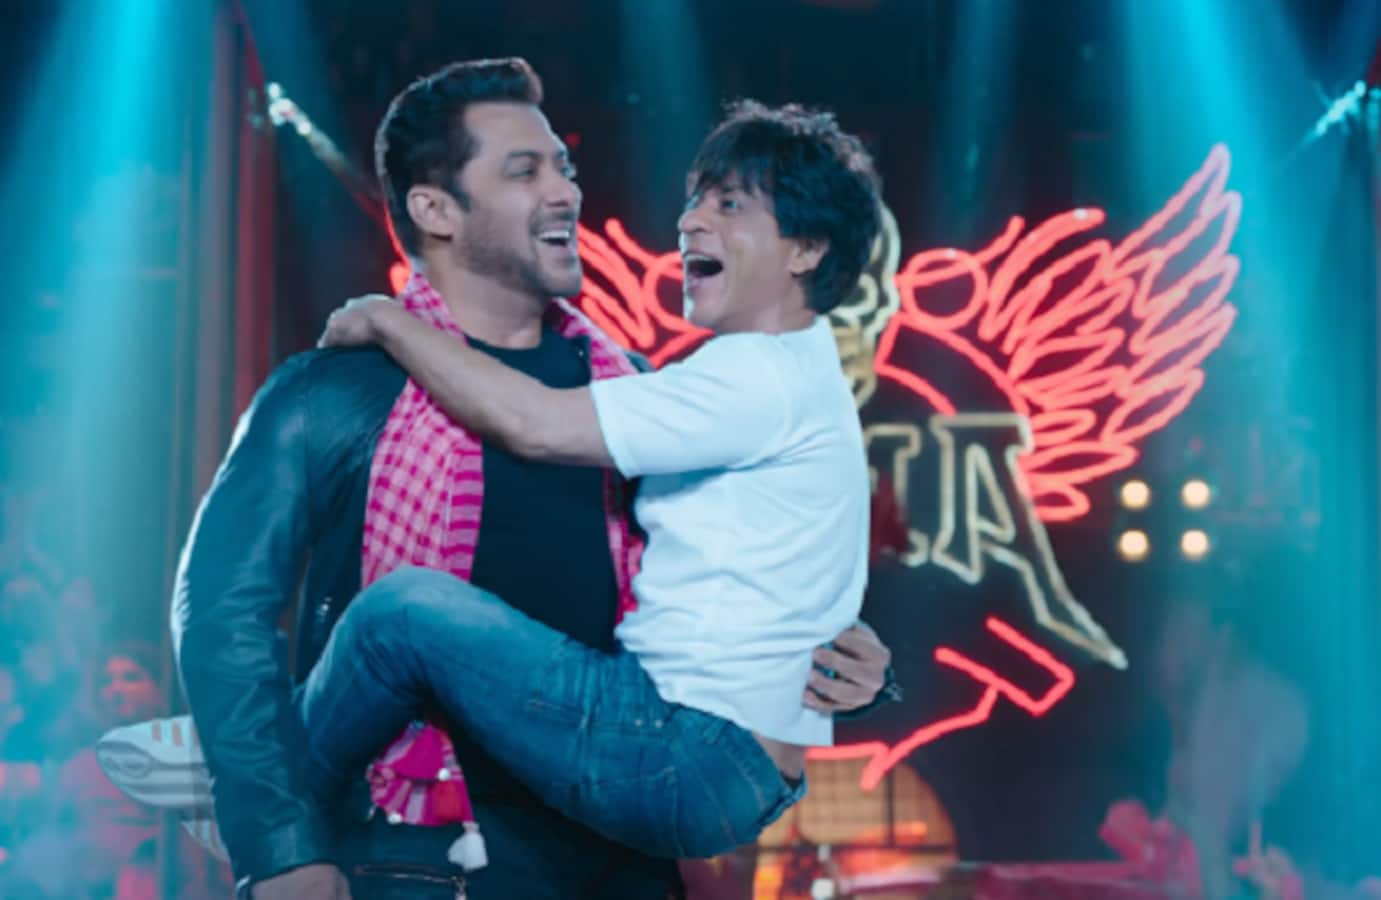 Zero teaser out now! Shah Rukh Khan and Salman Khan give us the sweetest Eidi as they dance their hearts out - watch video